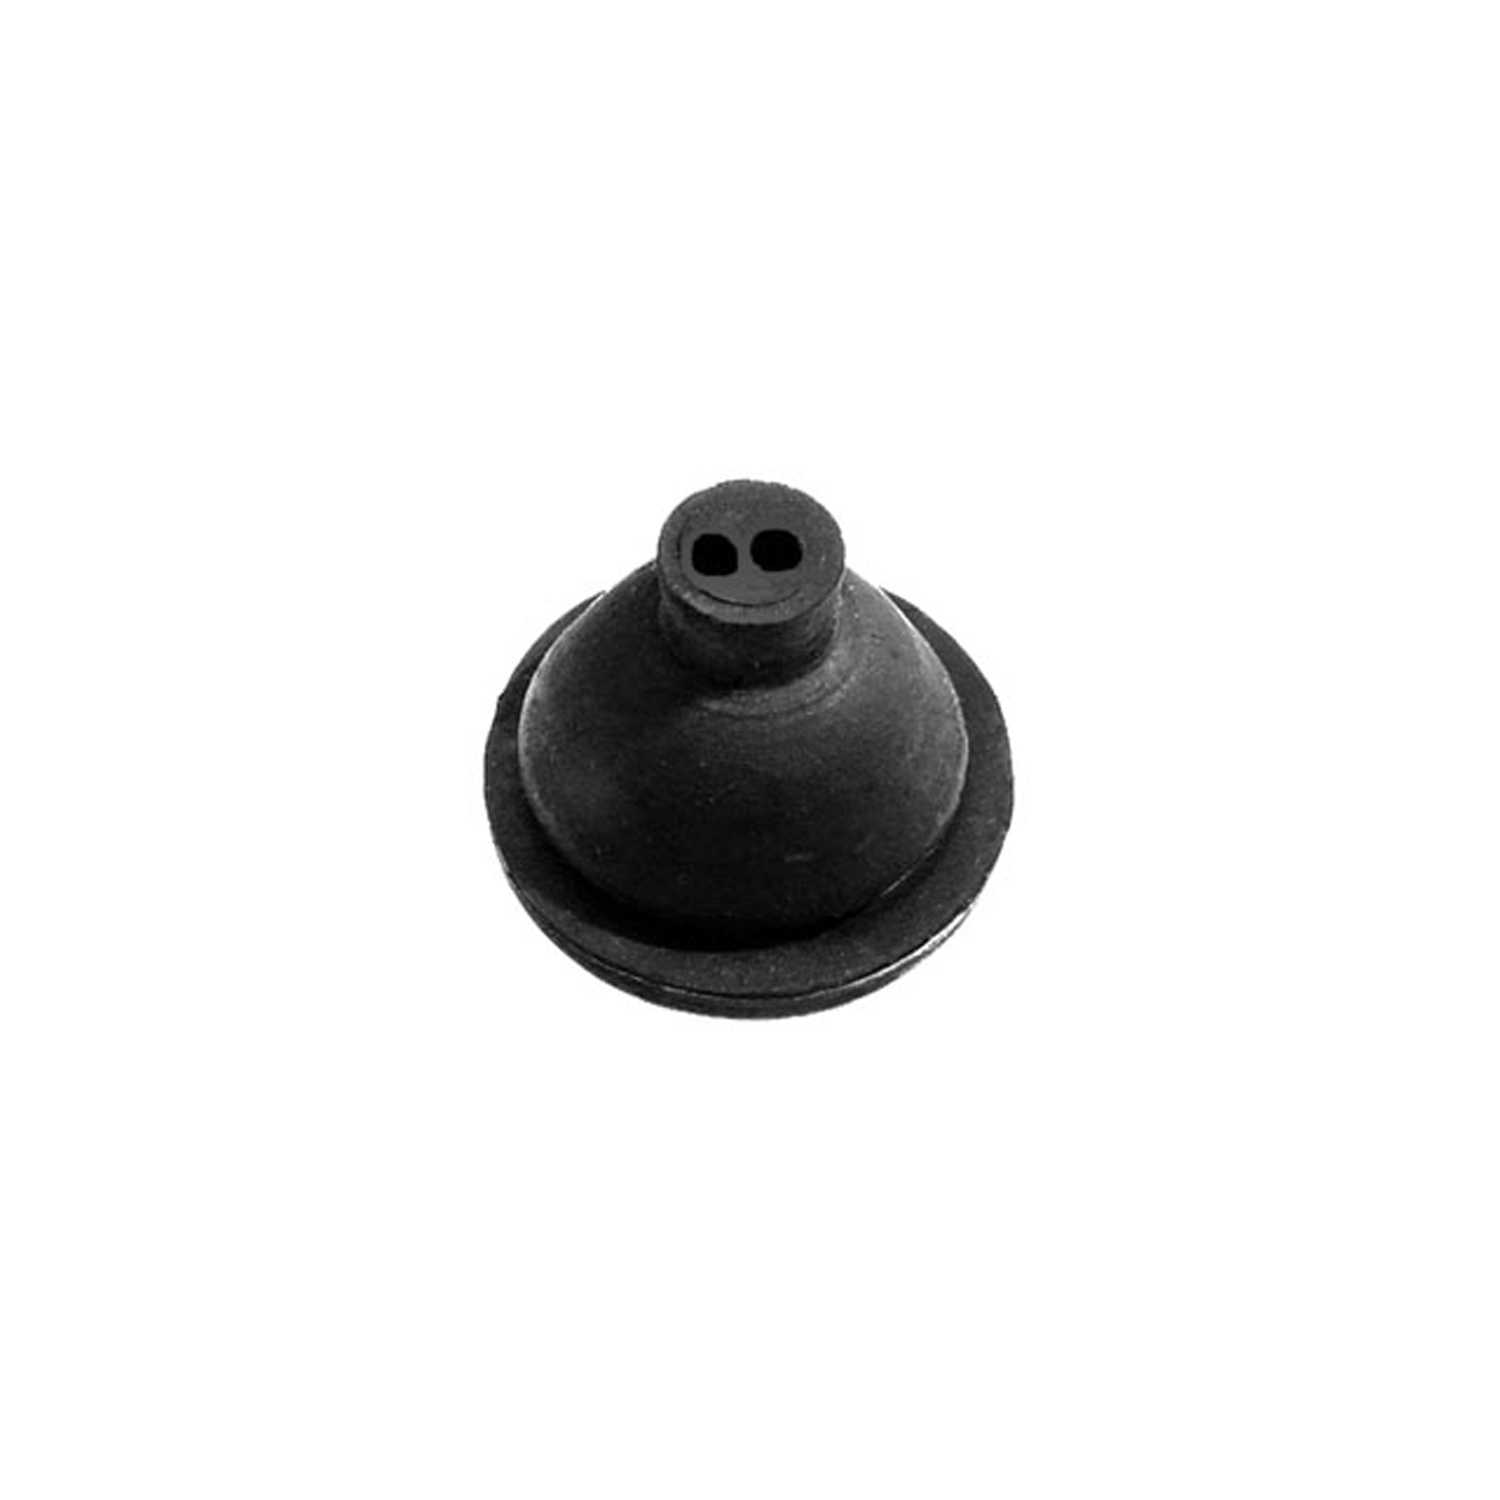 1967 Chevrolet G20 Van Dash  Firewall Grommet.  Double-hole type for two wires-RP 1-G